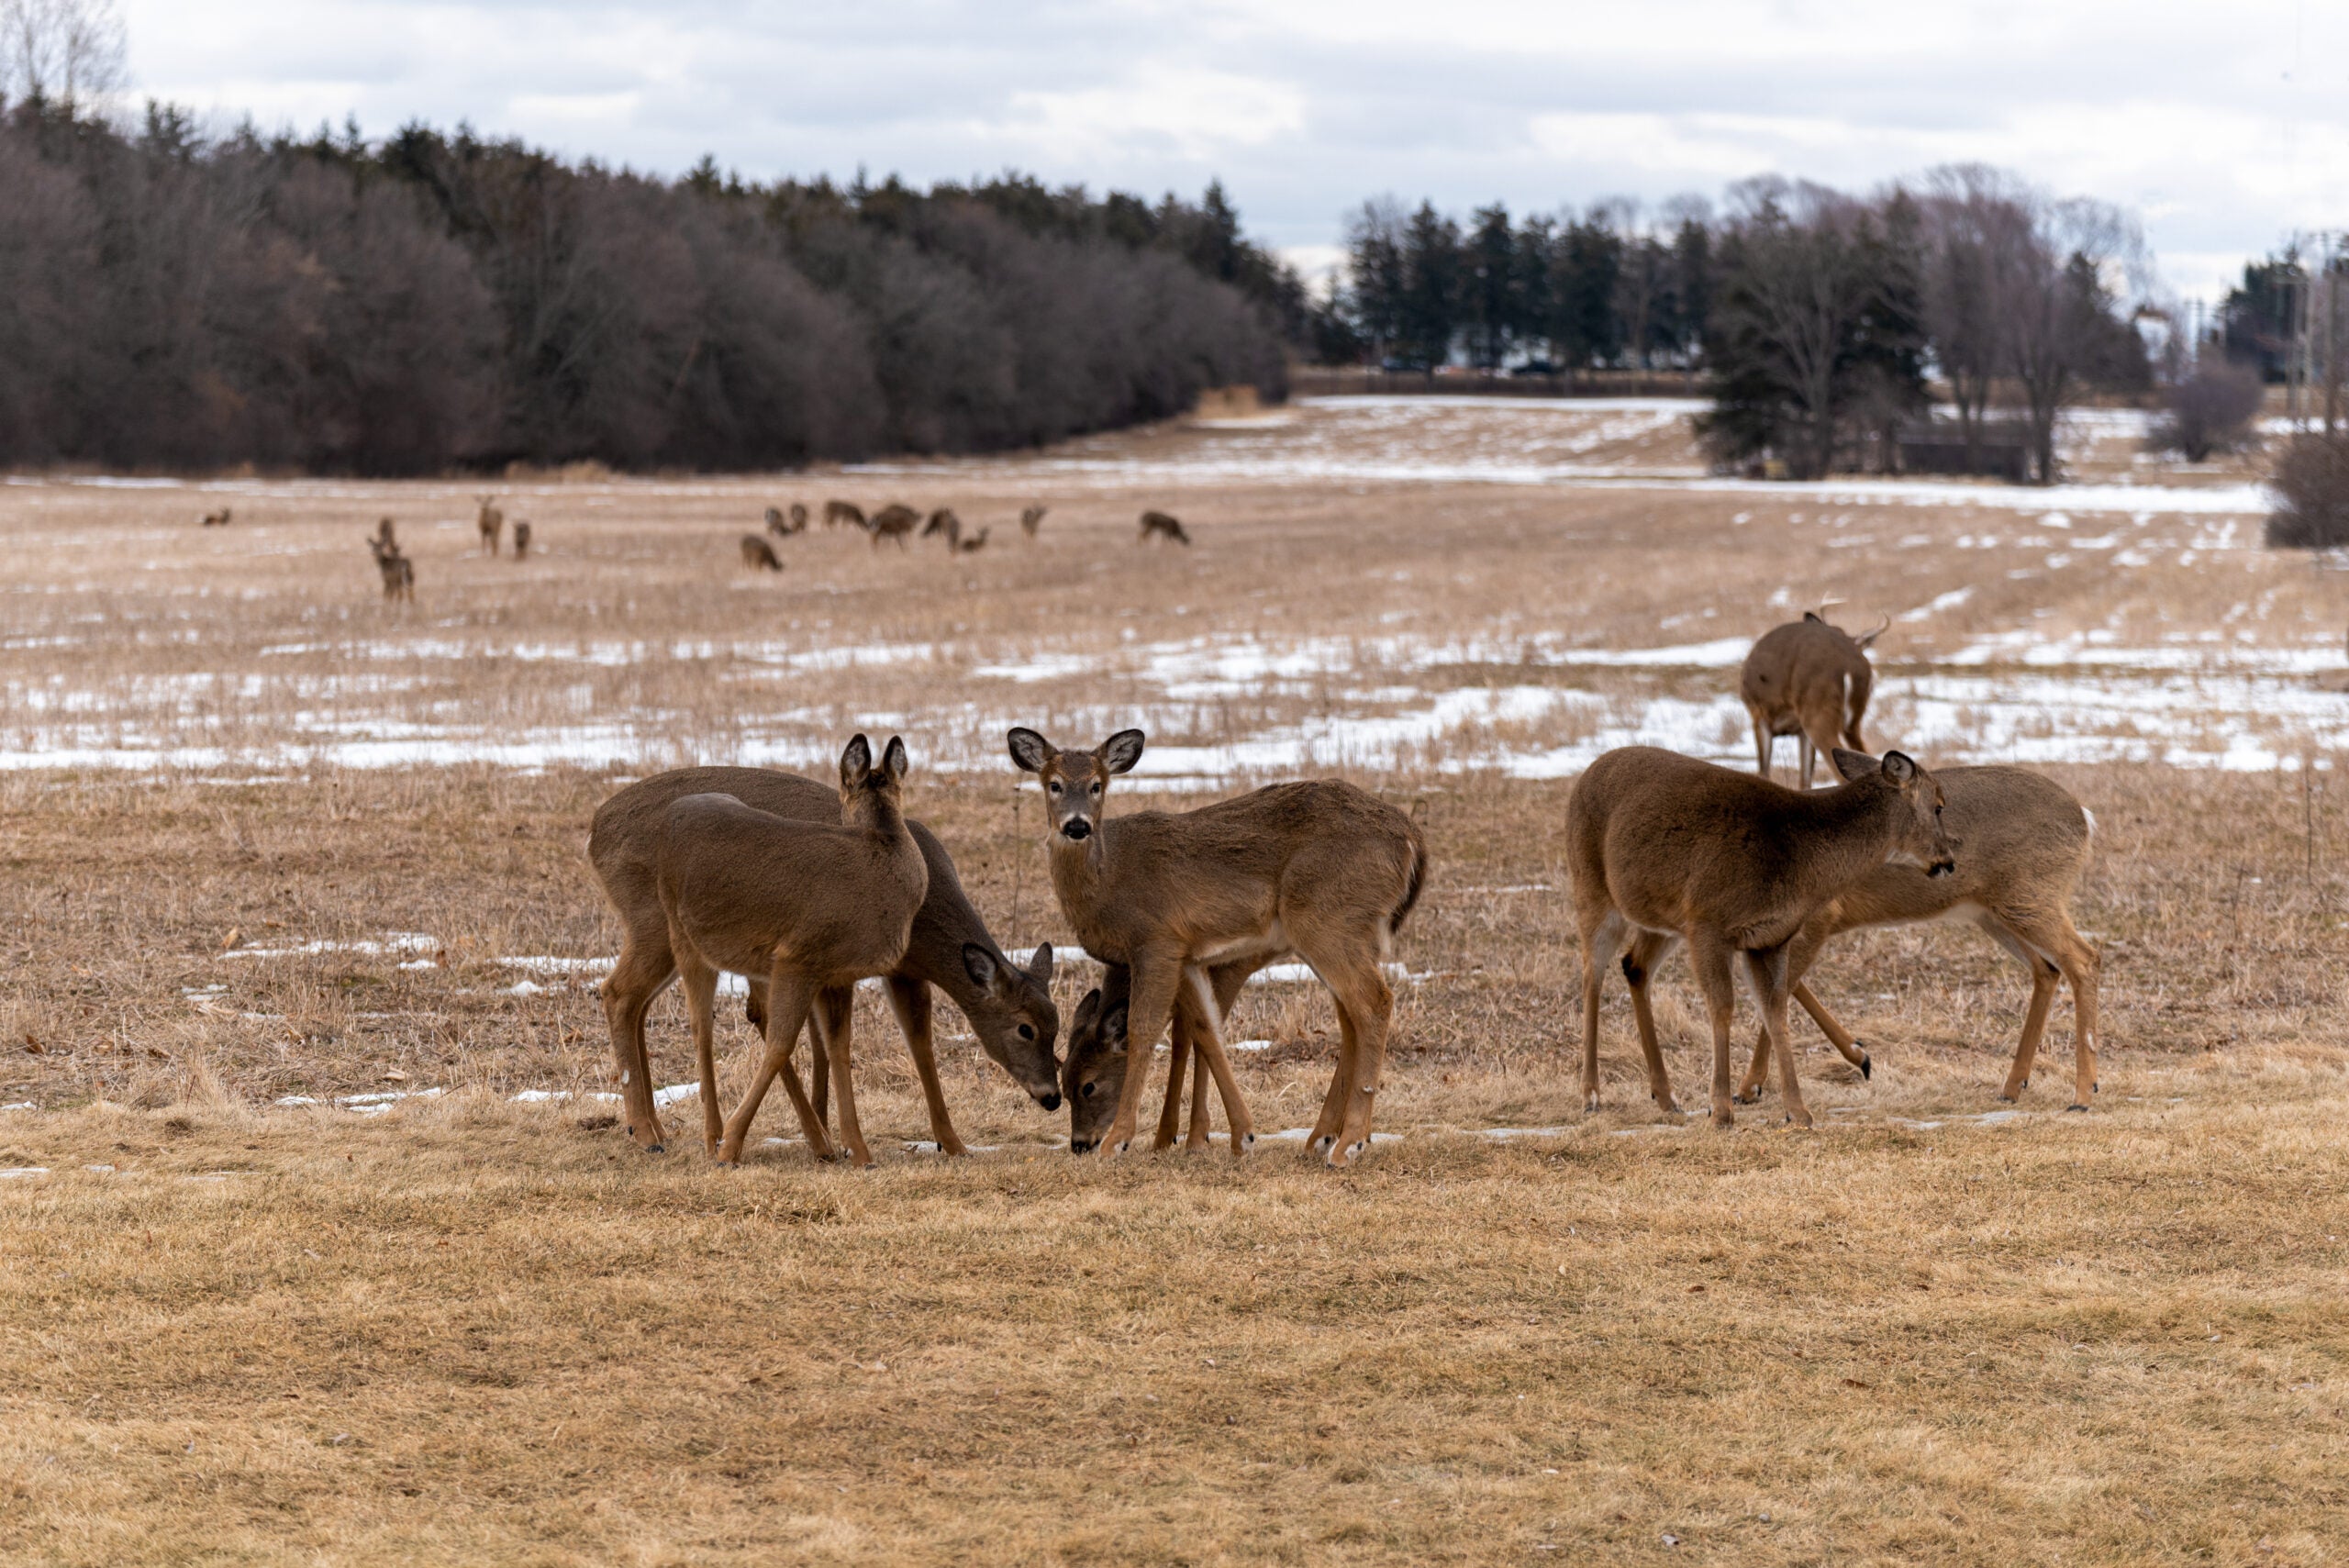 A large group of whitetail deer feed in an early spring field